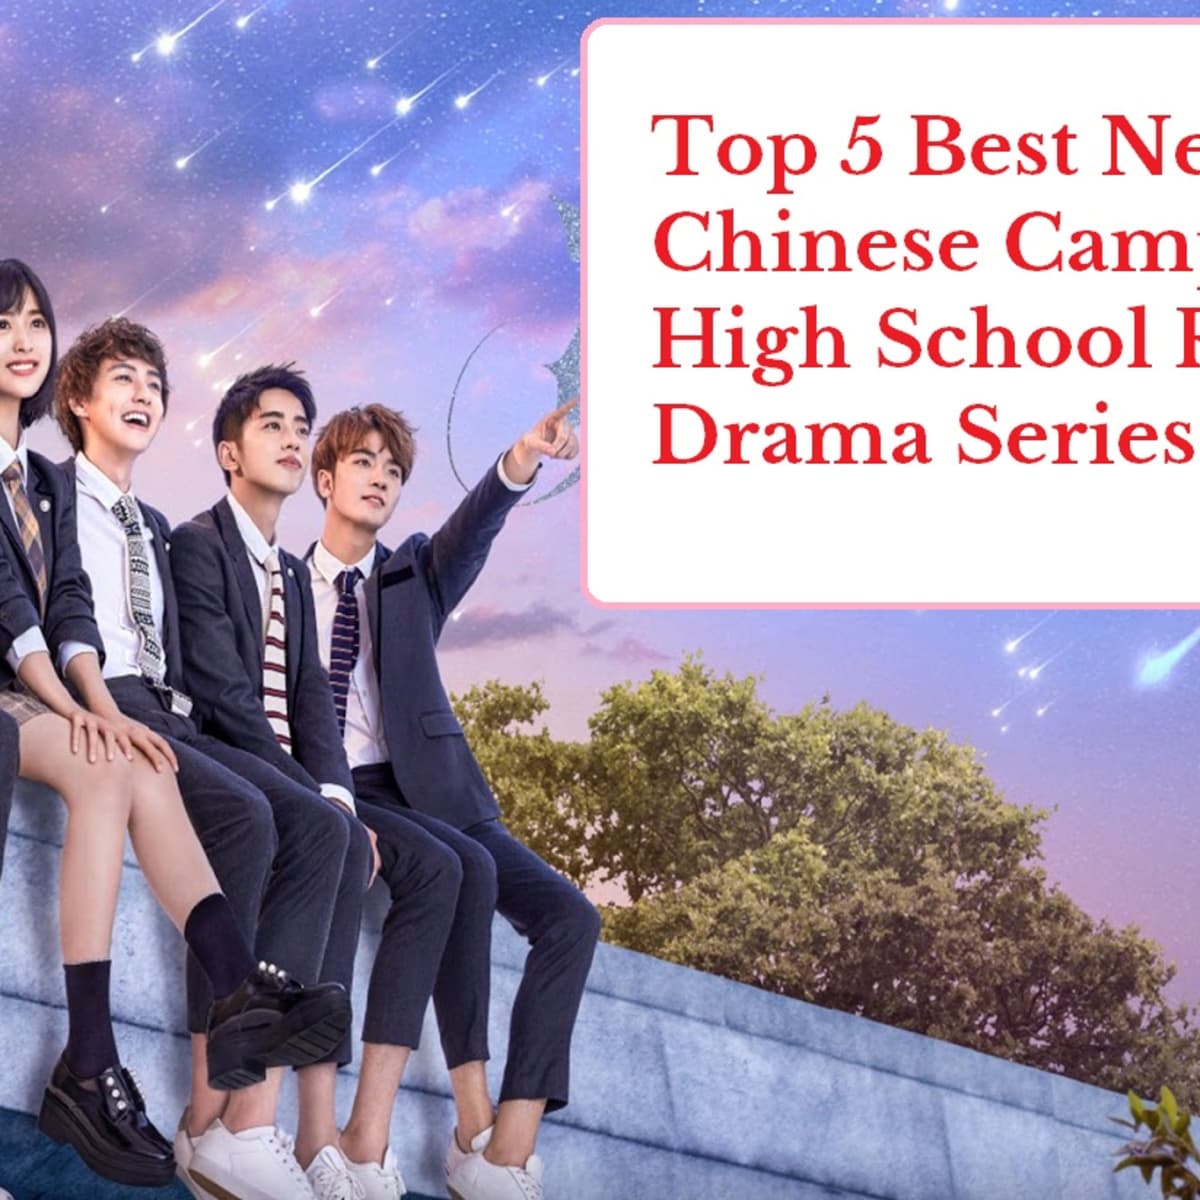 Top 5 Best New Chinese and High School Drama Series - HubPages